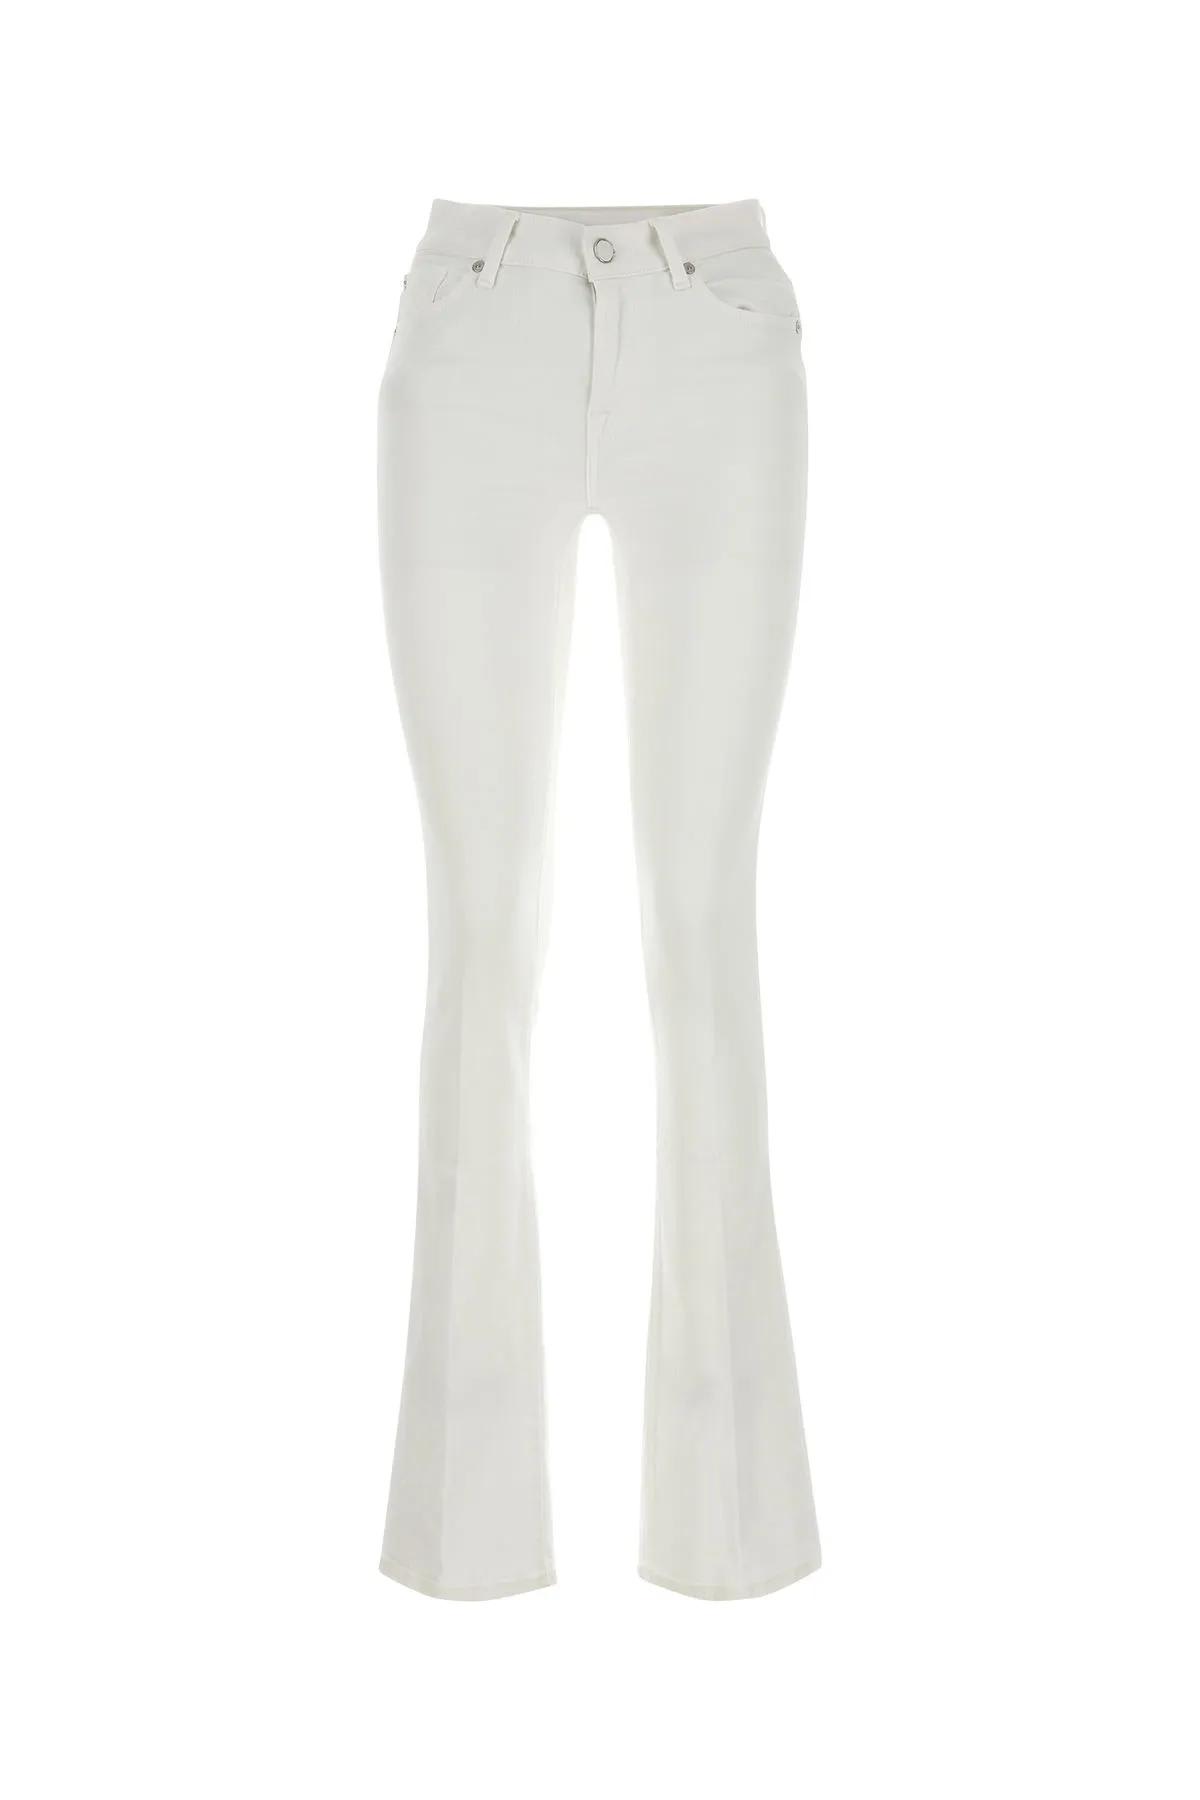 Shop 7 For All Mankind White Stretch Denim Bootcut Jeans